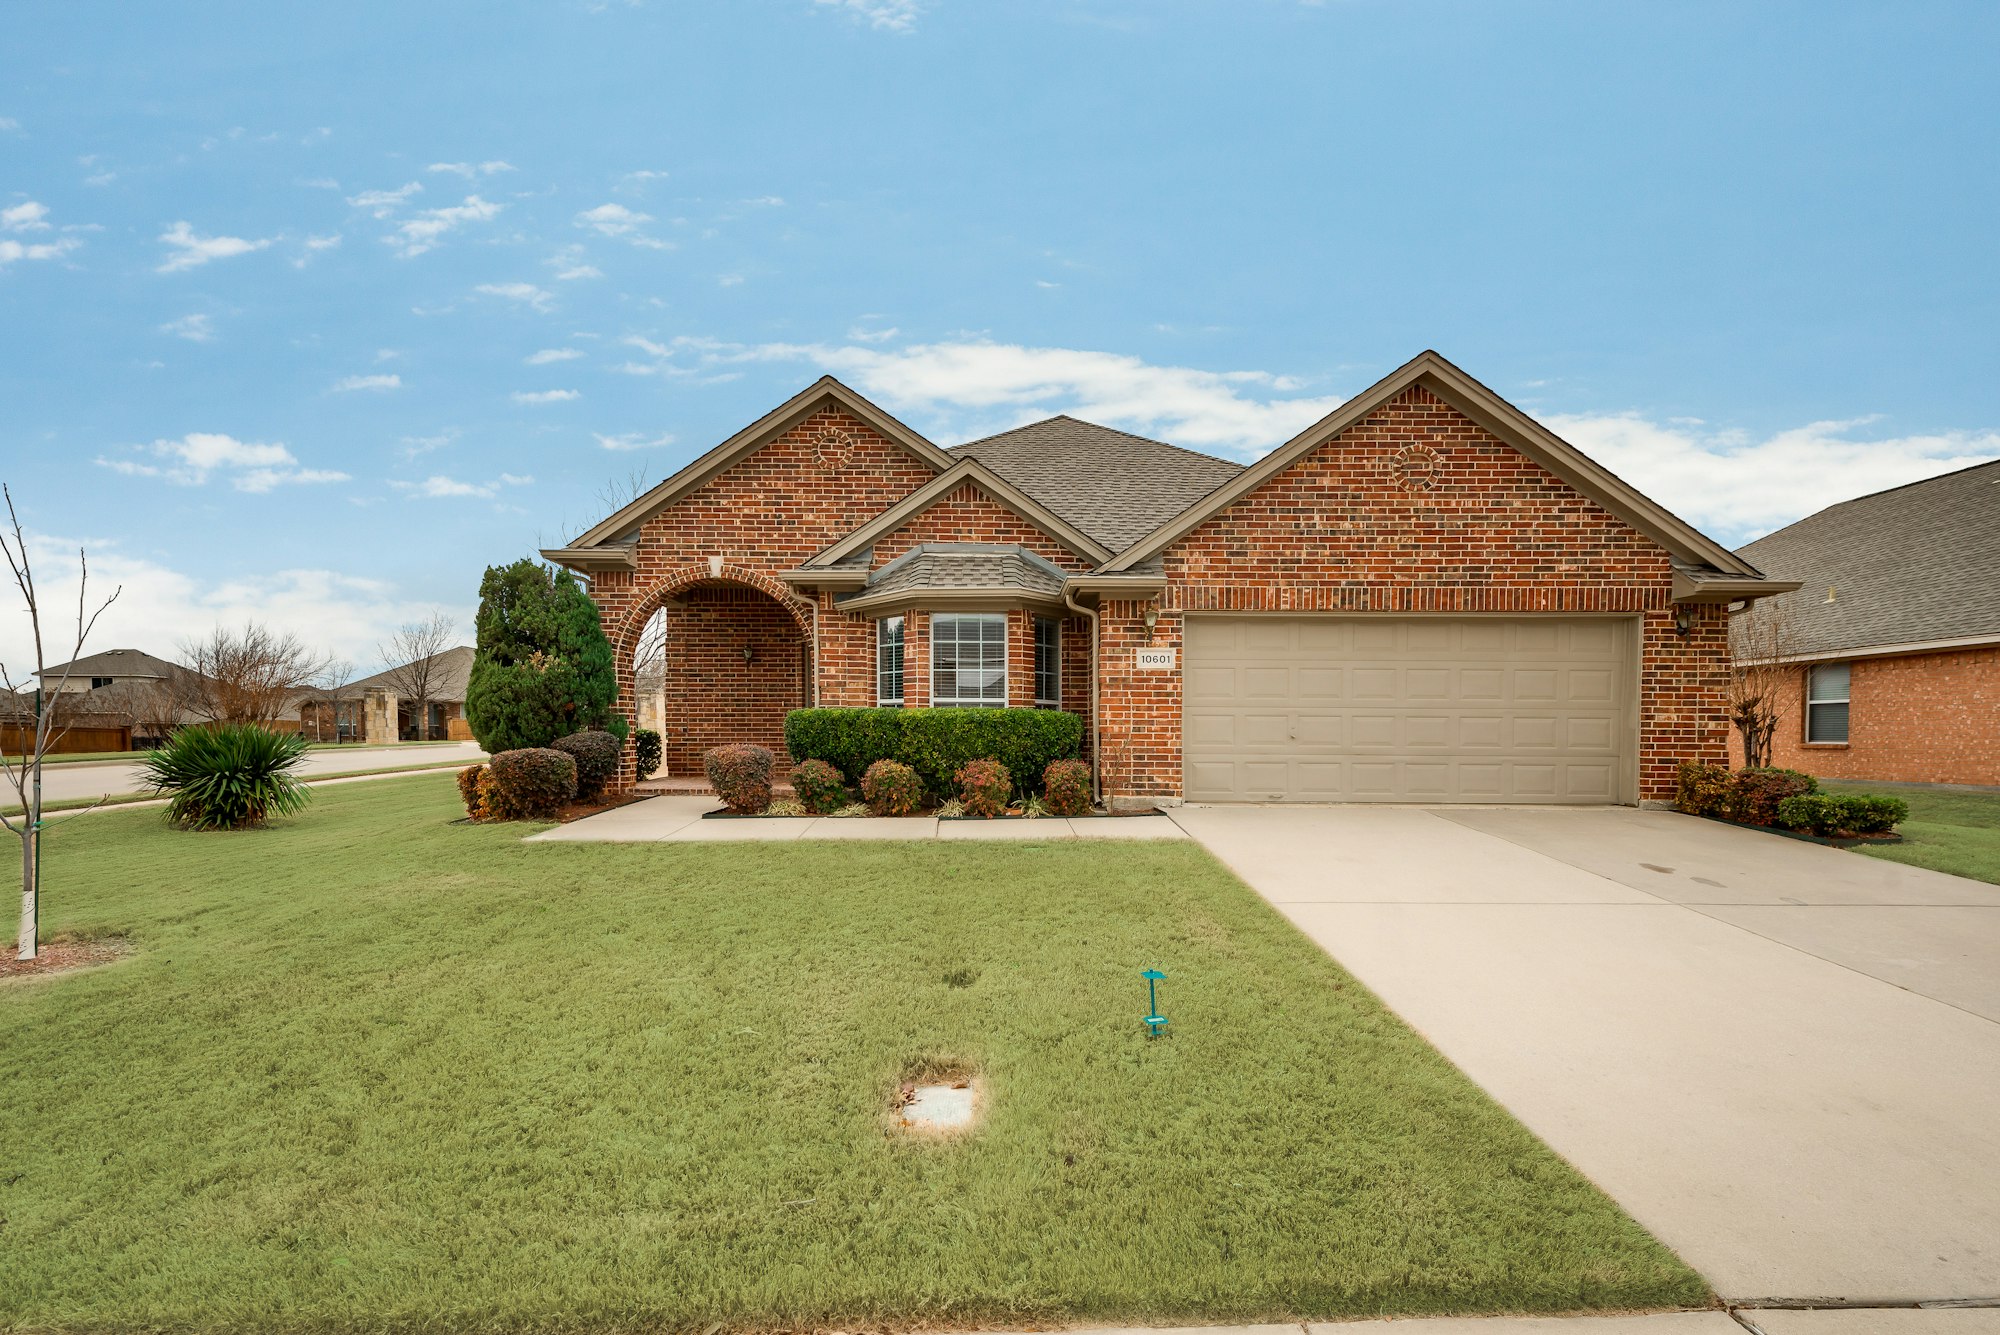 Photo 1 of 26 - 10601 Melrose Ln, Fort Worth, TX 76244